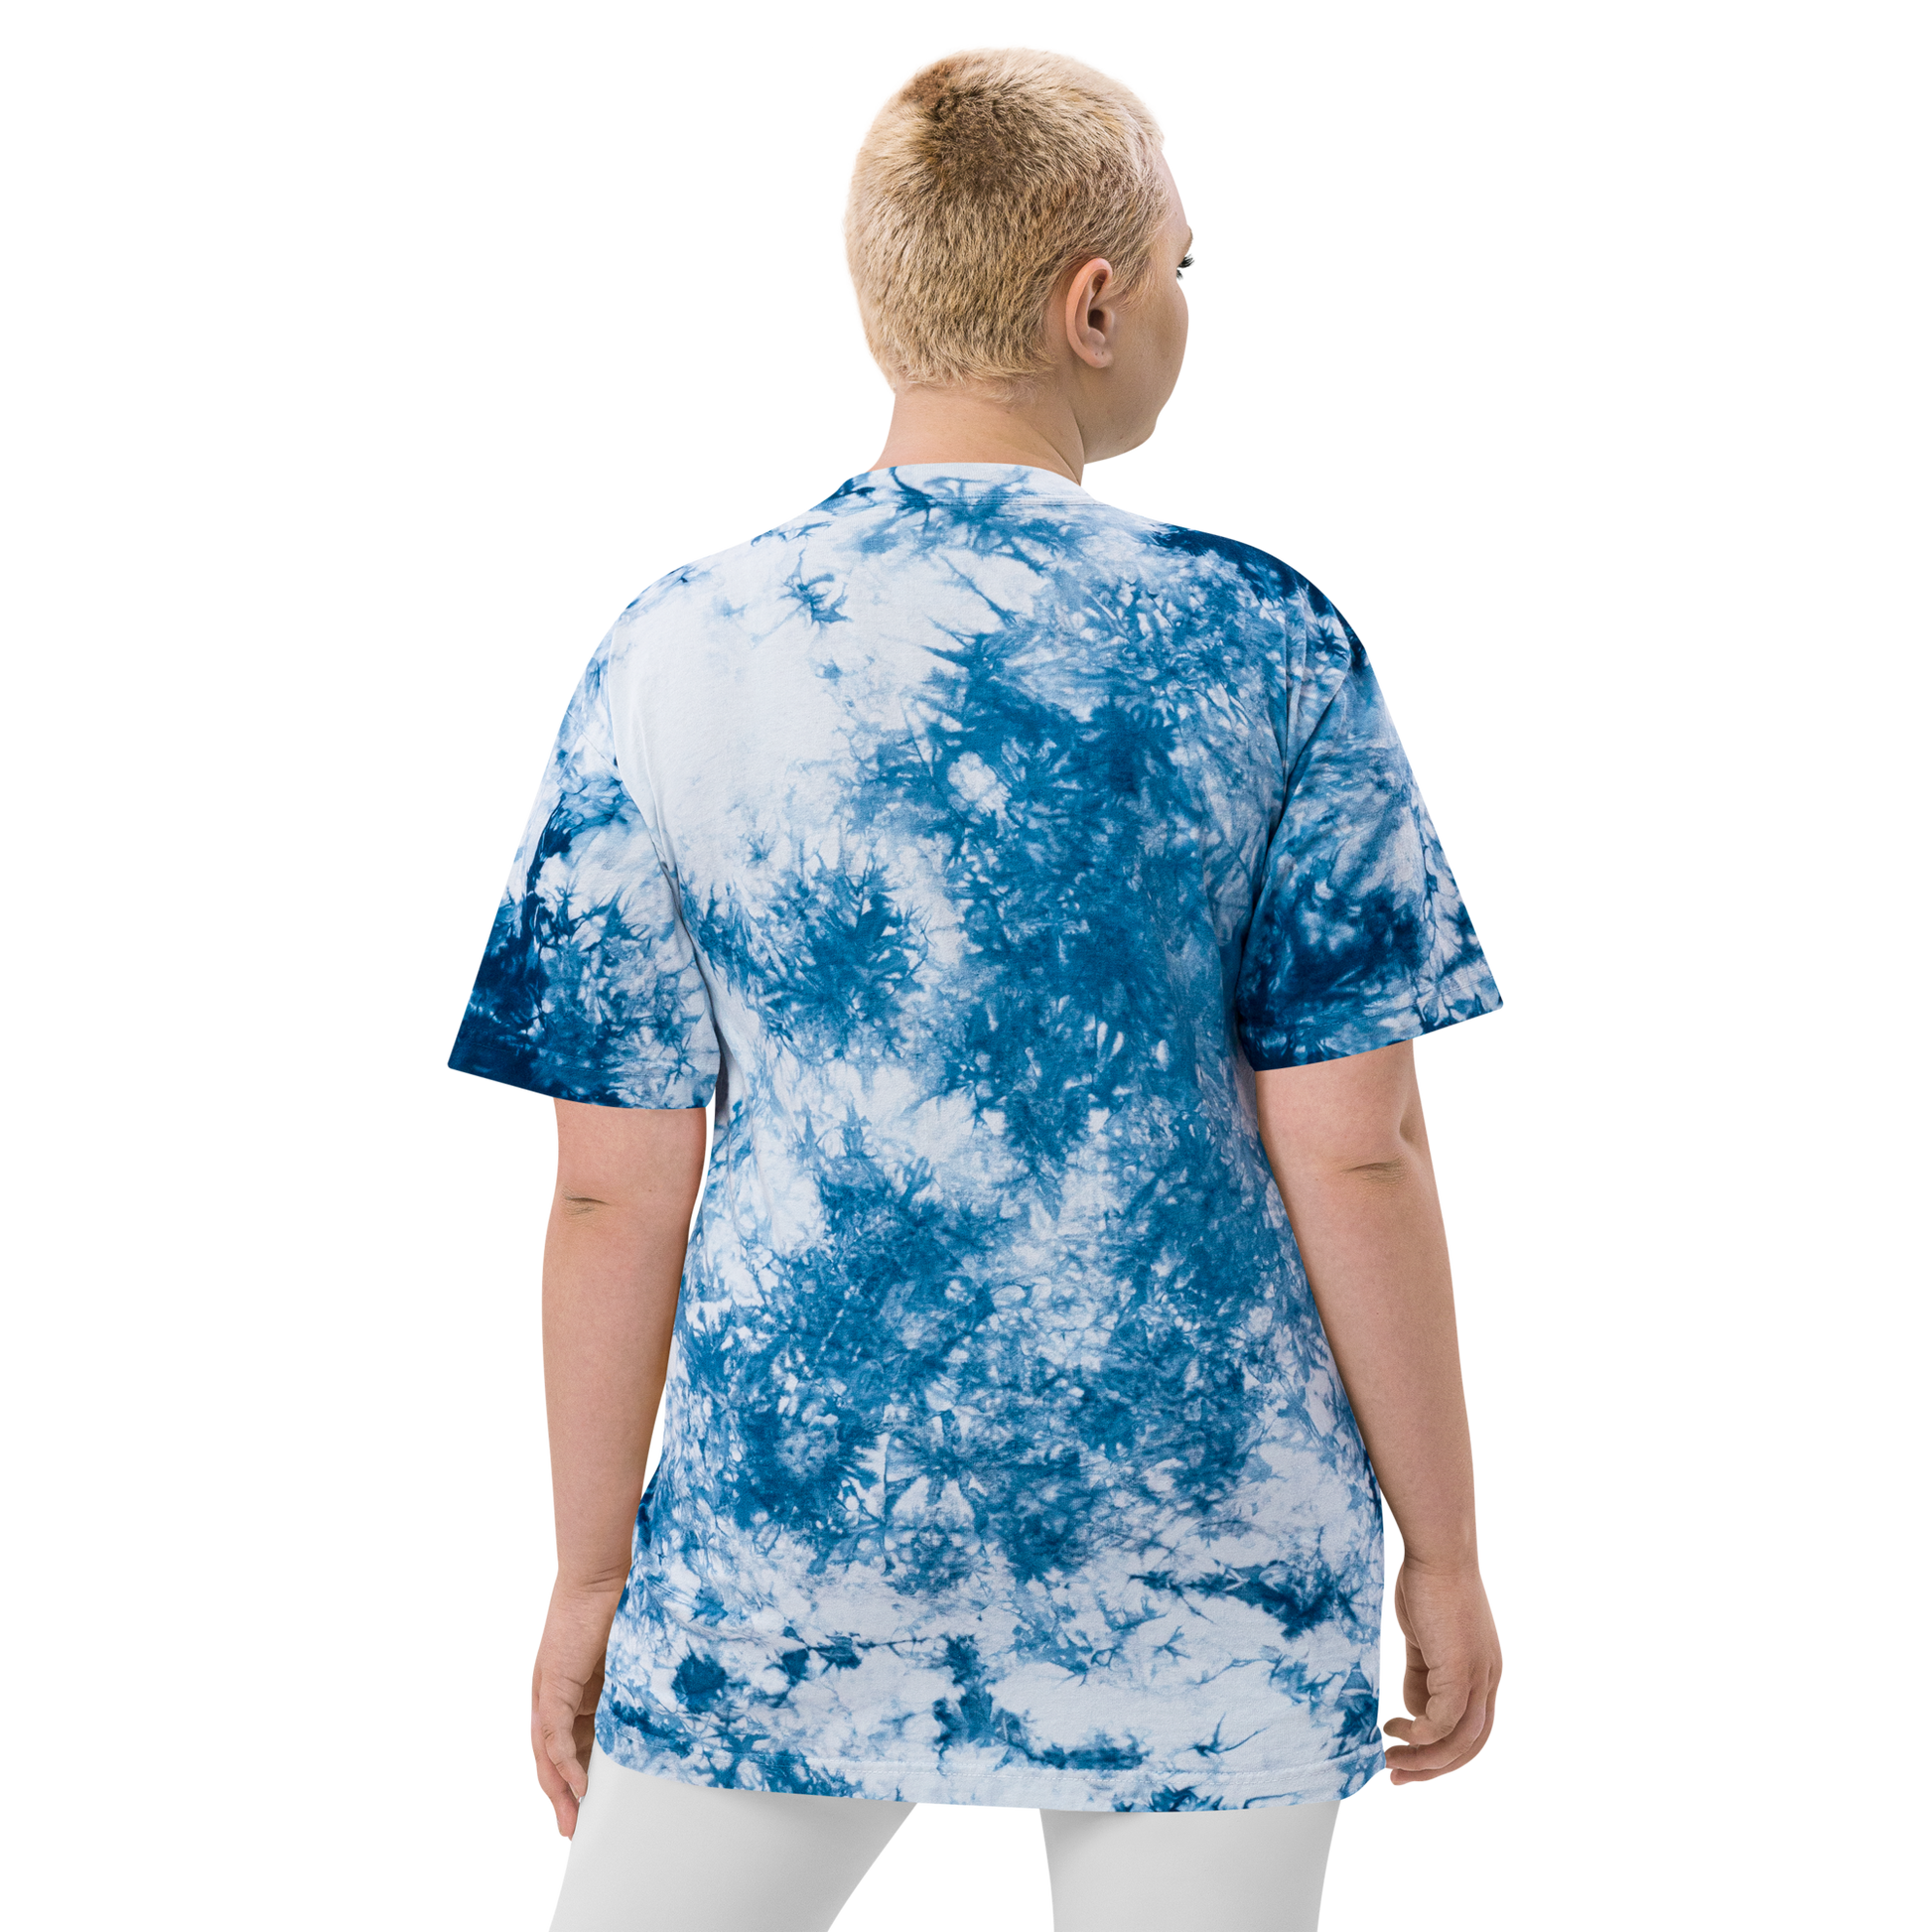 YHM Designs - YUL Montreal Oversized Tie-Dye T-Shirt - Crossed-X Design with Airport Code and Vintage Propliner - White Embroidery - Image 09